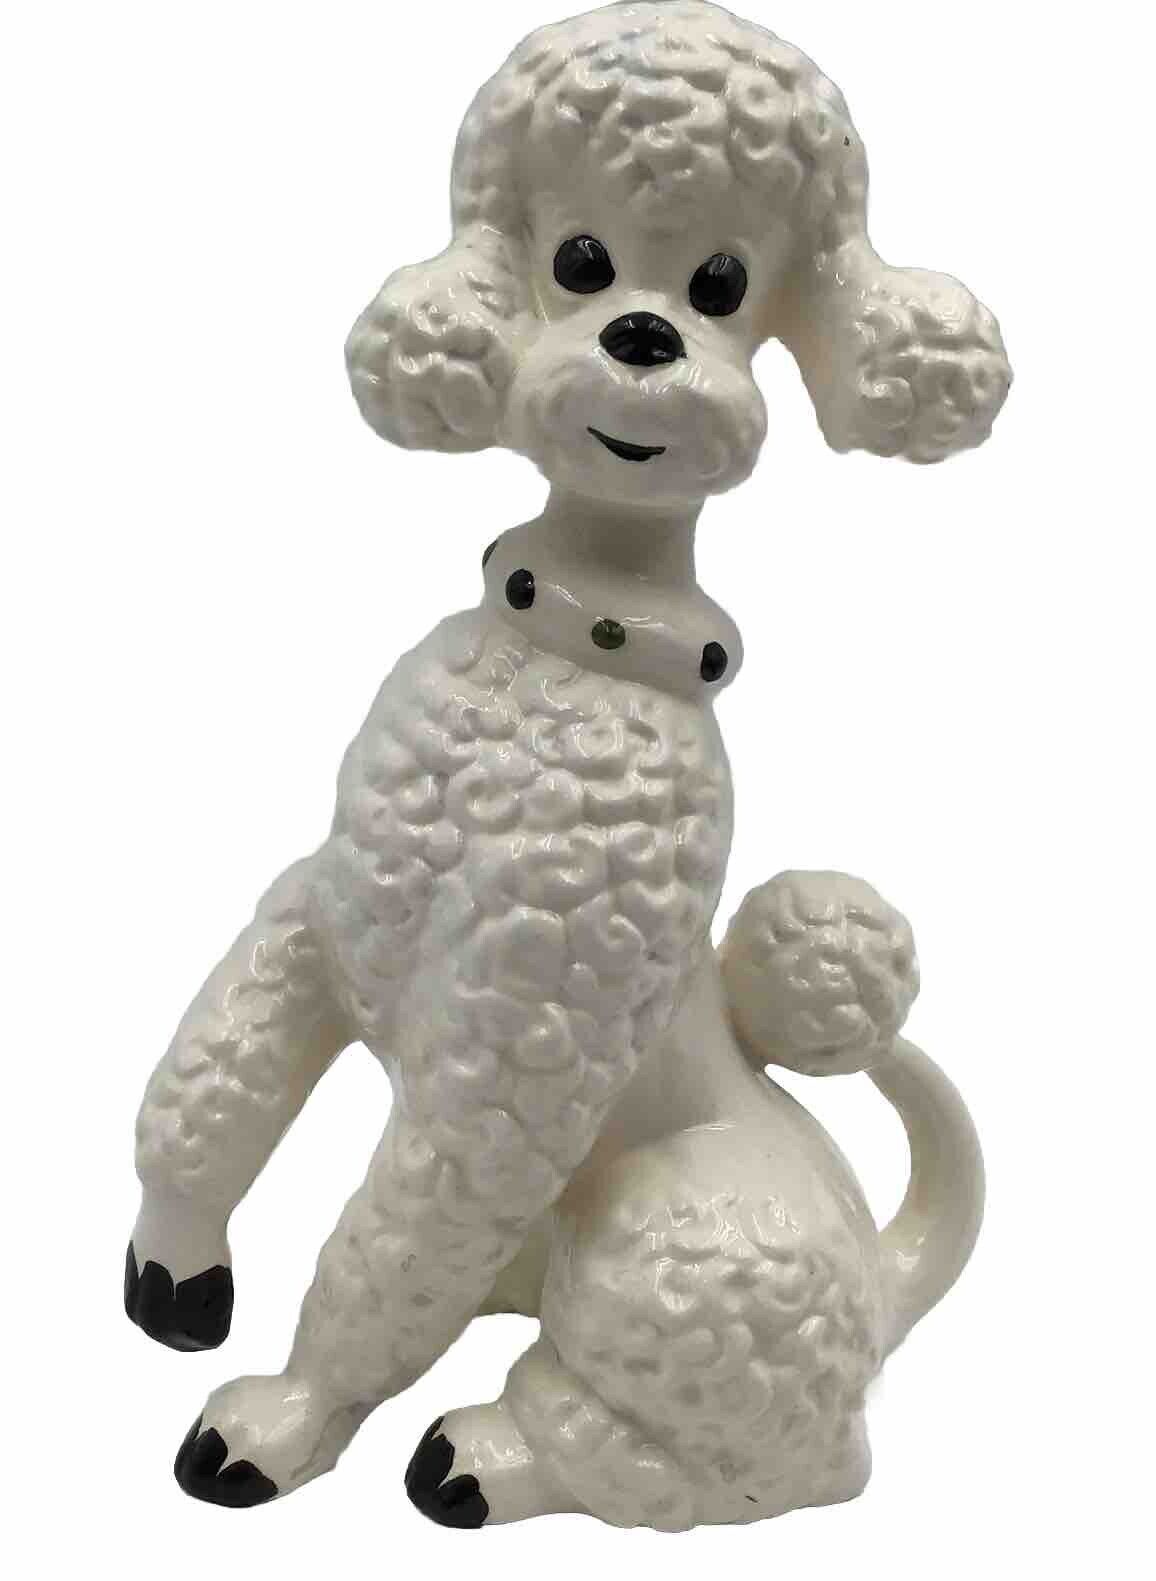 Poodle Ceramic Figure Hand Made 1968 White/Black Accents Mid Century Modern￼ 10”